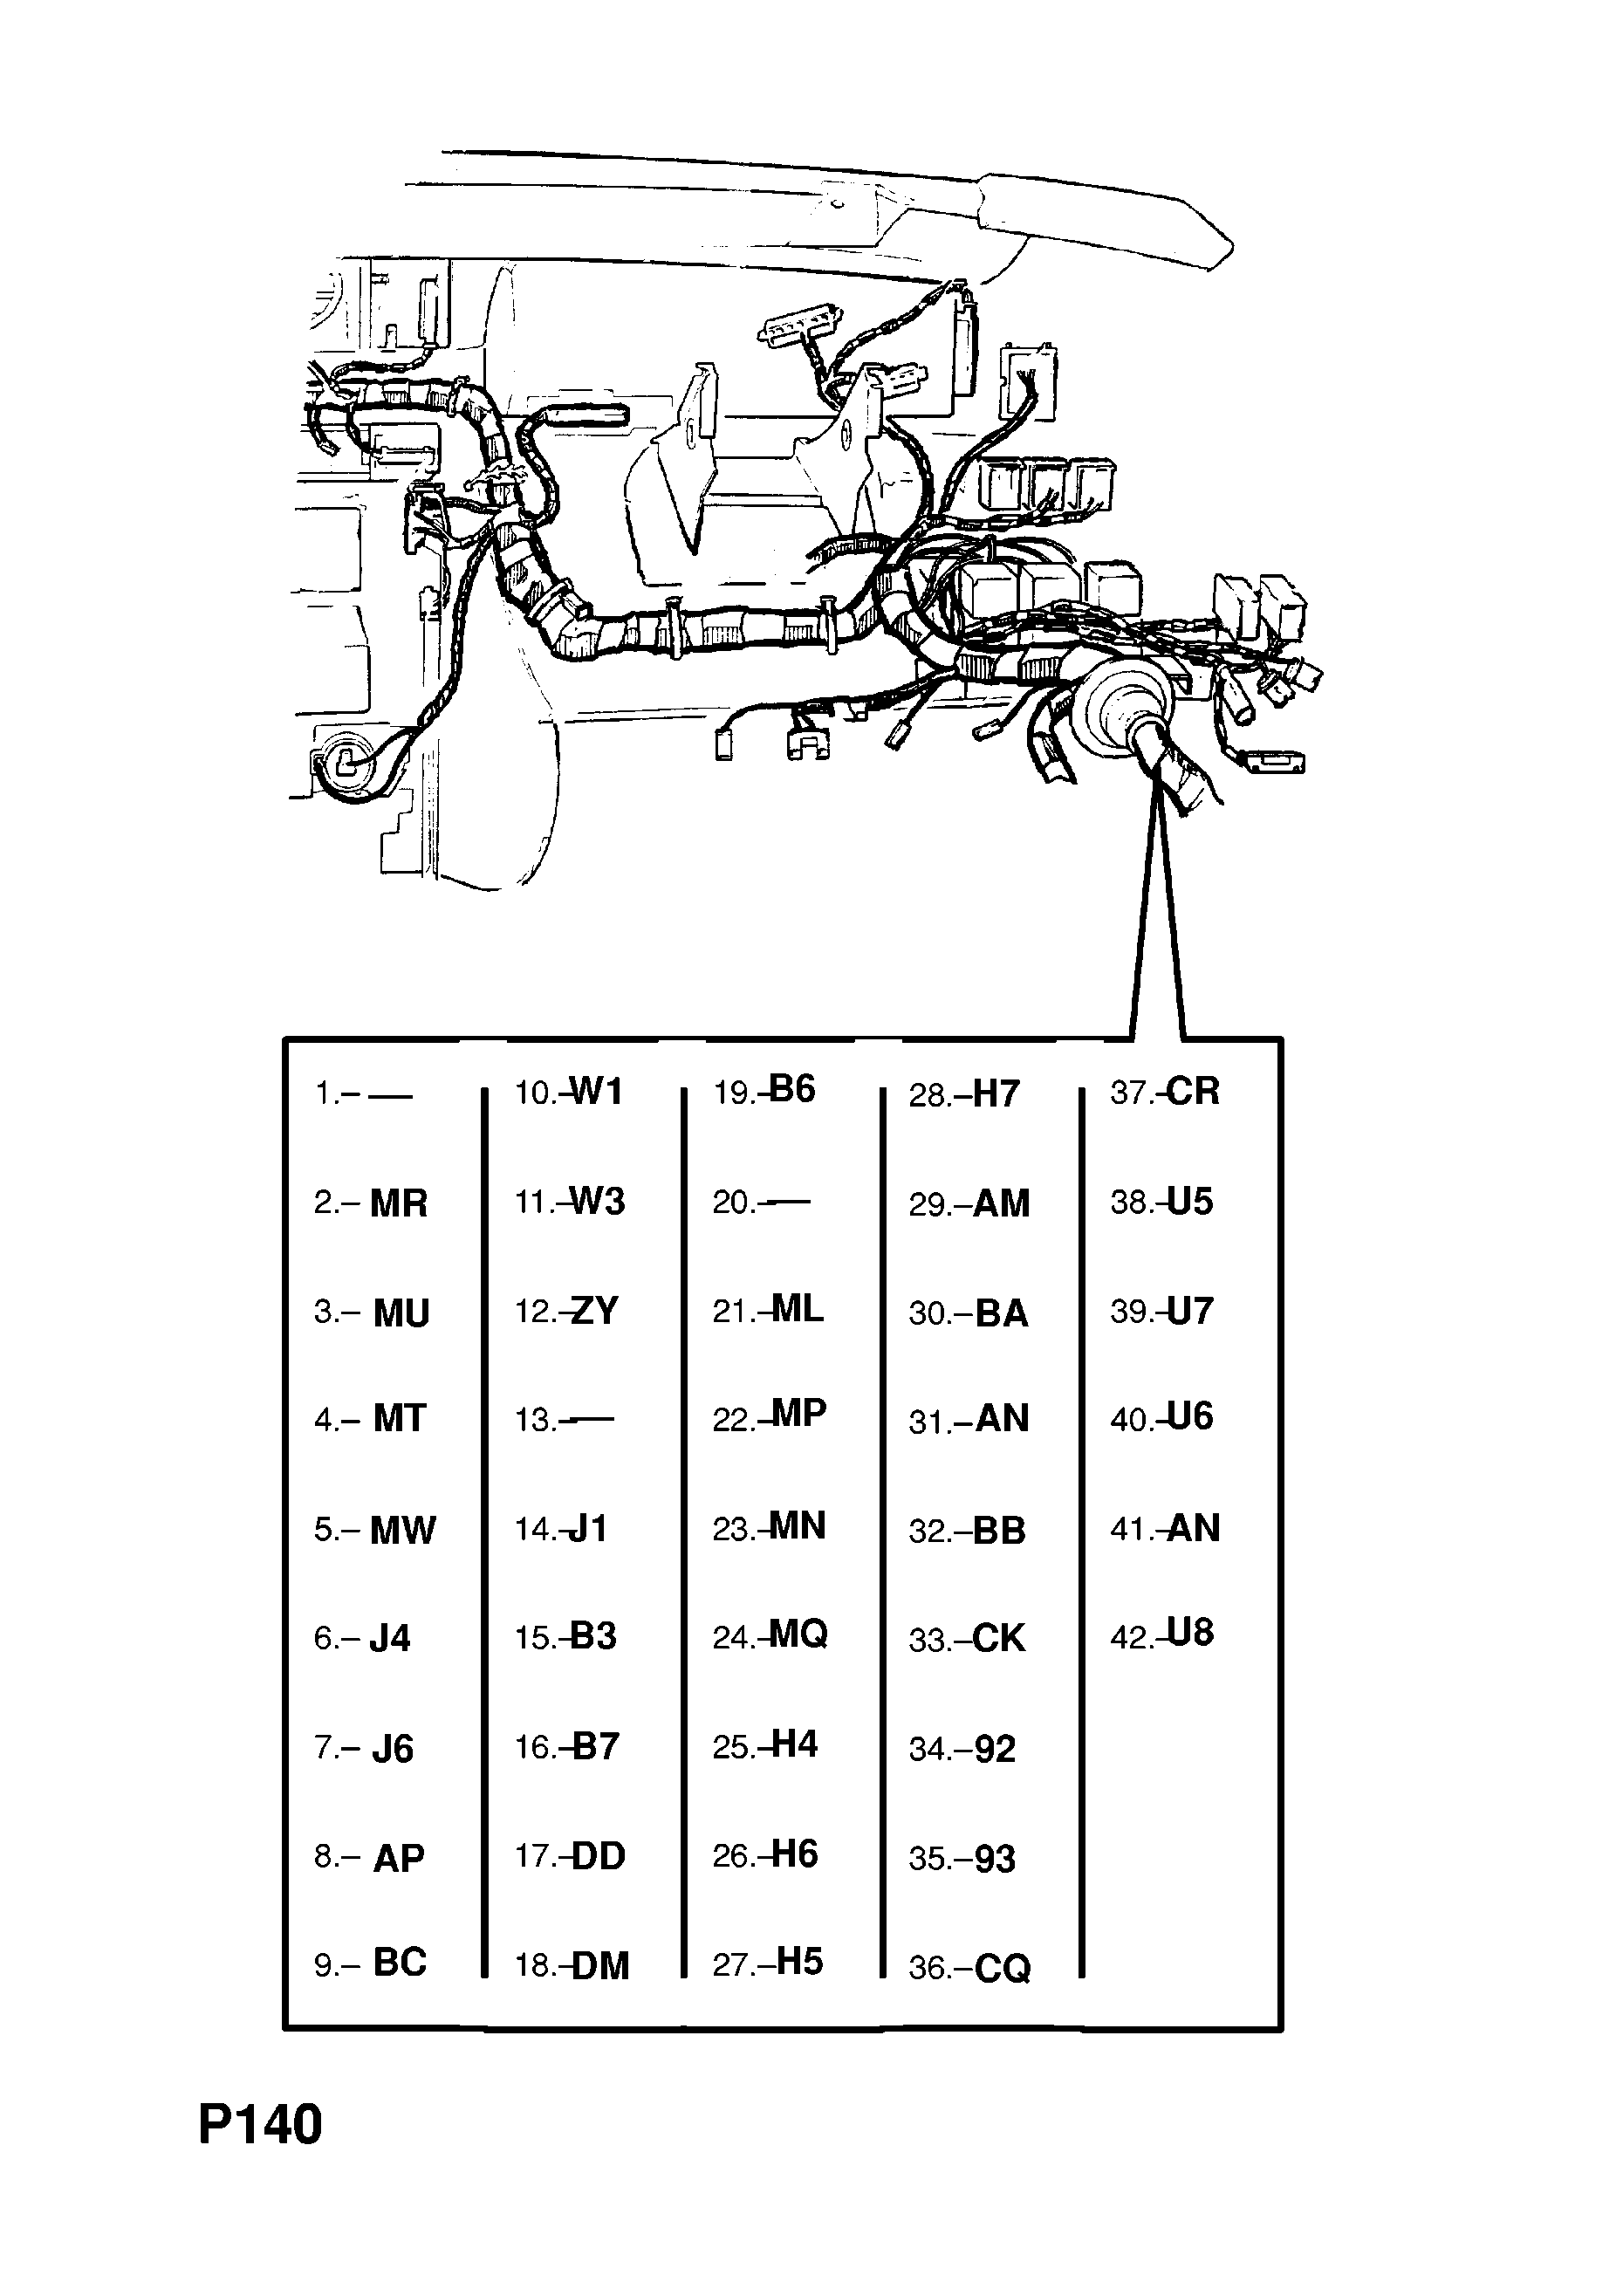 INSTRUMENT PANEL WIRING HARNESS (CONTD.) <small><i>[H1000001-L1999999 FOR AUTOMATIC TRANSMISSION AND LCD INSTRUMENTS EXCEPT AIR CONDITIONING (CONTD.)]</i></small>